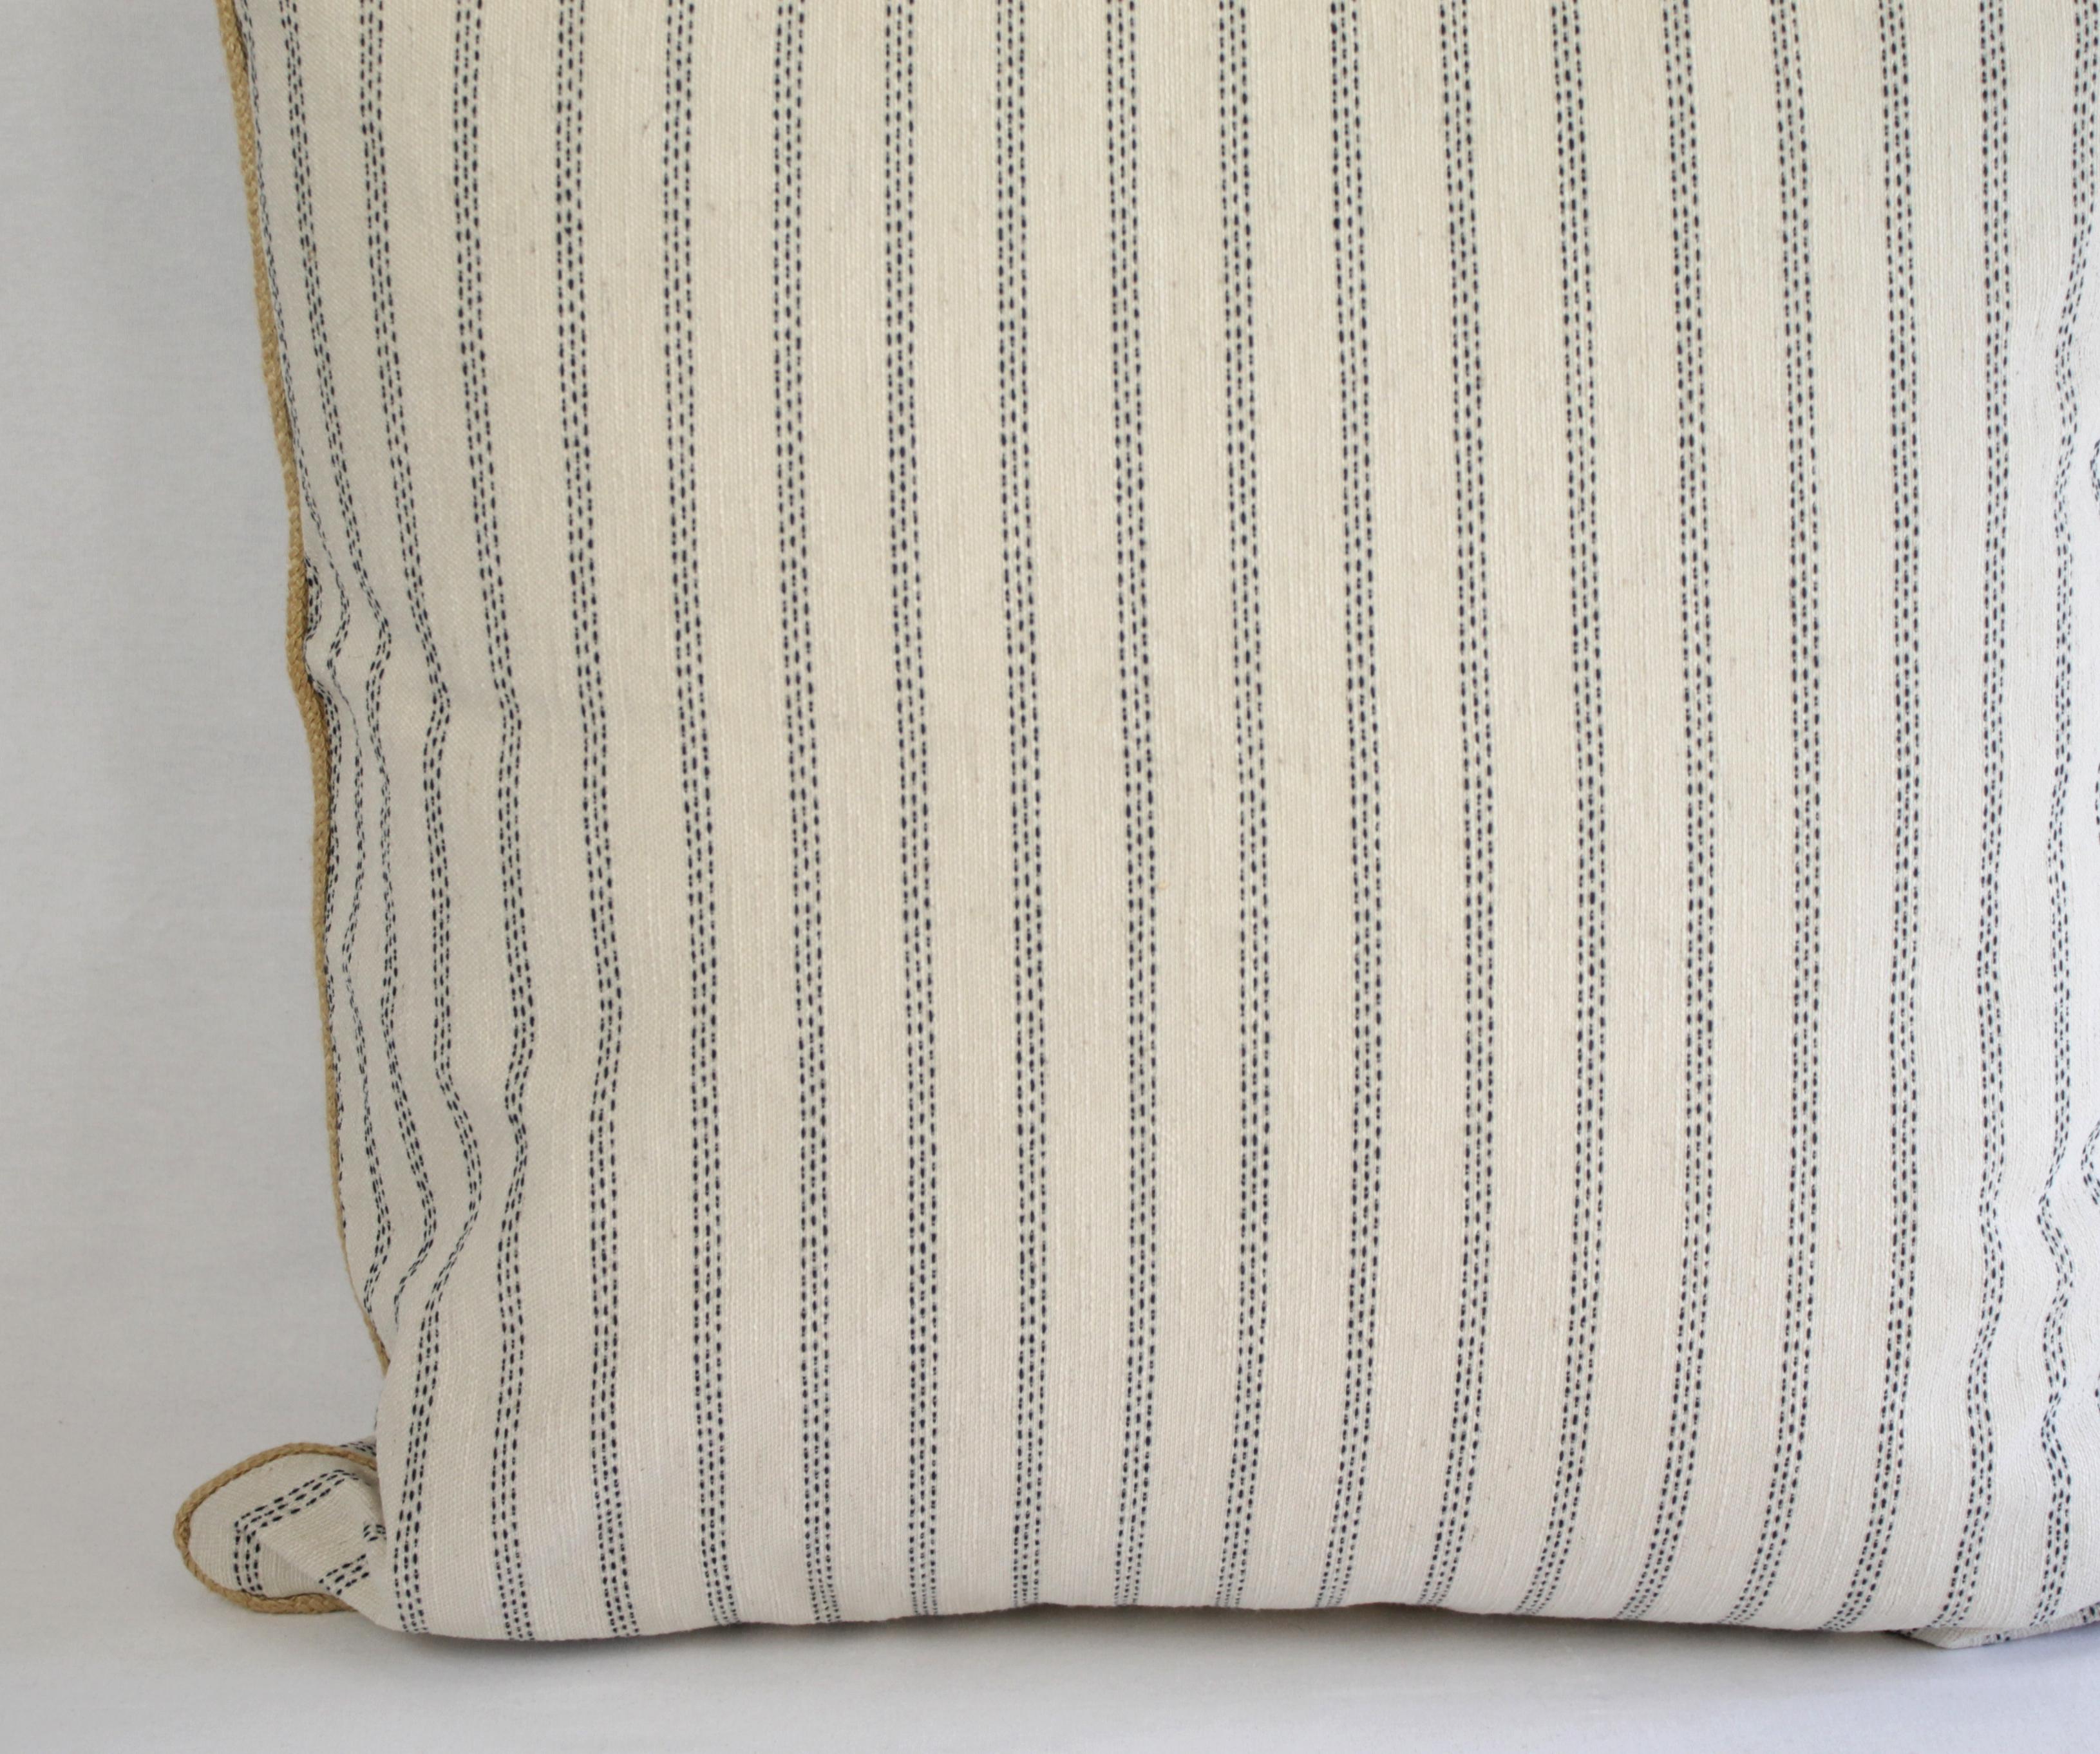 Custom Natural and Navy Ticking Stripe Pillow with Braided Jute Cord 6